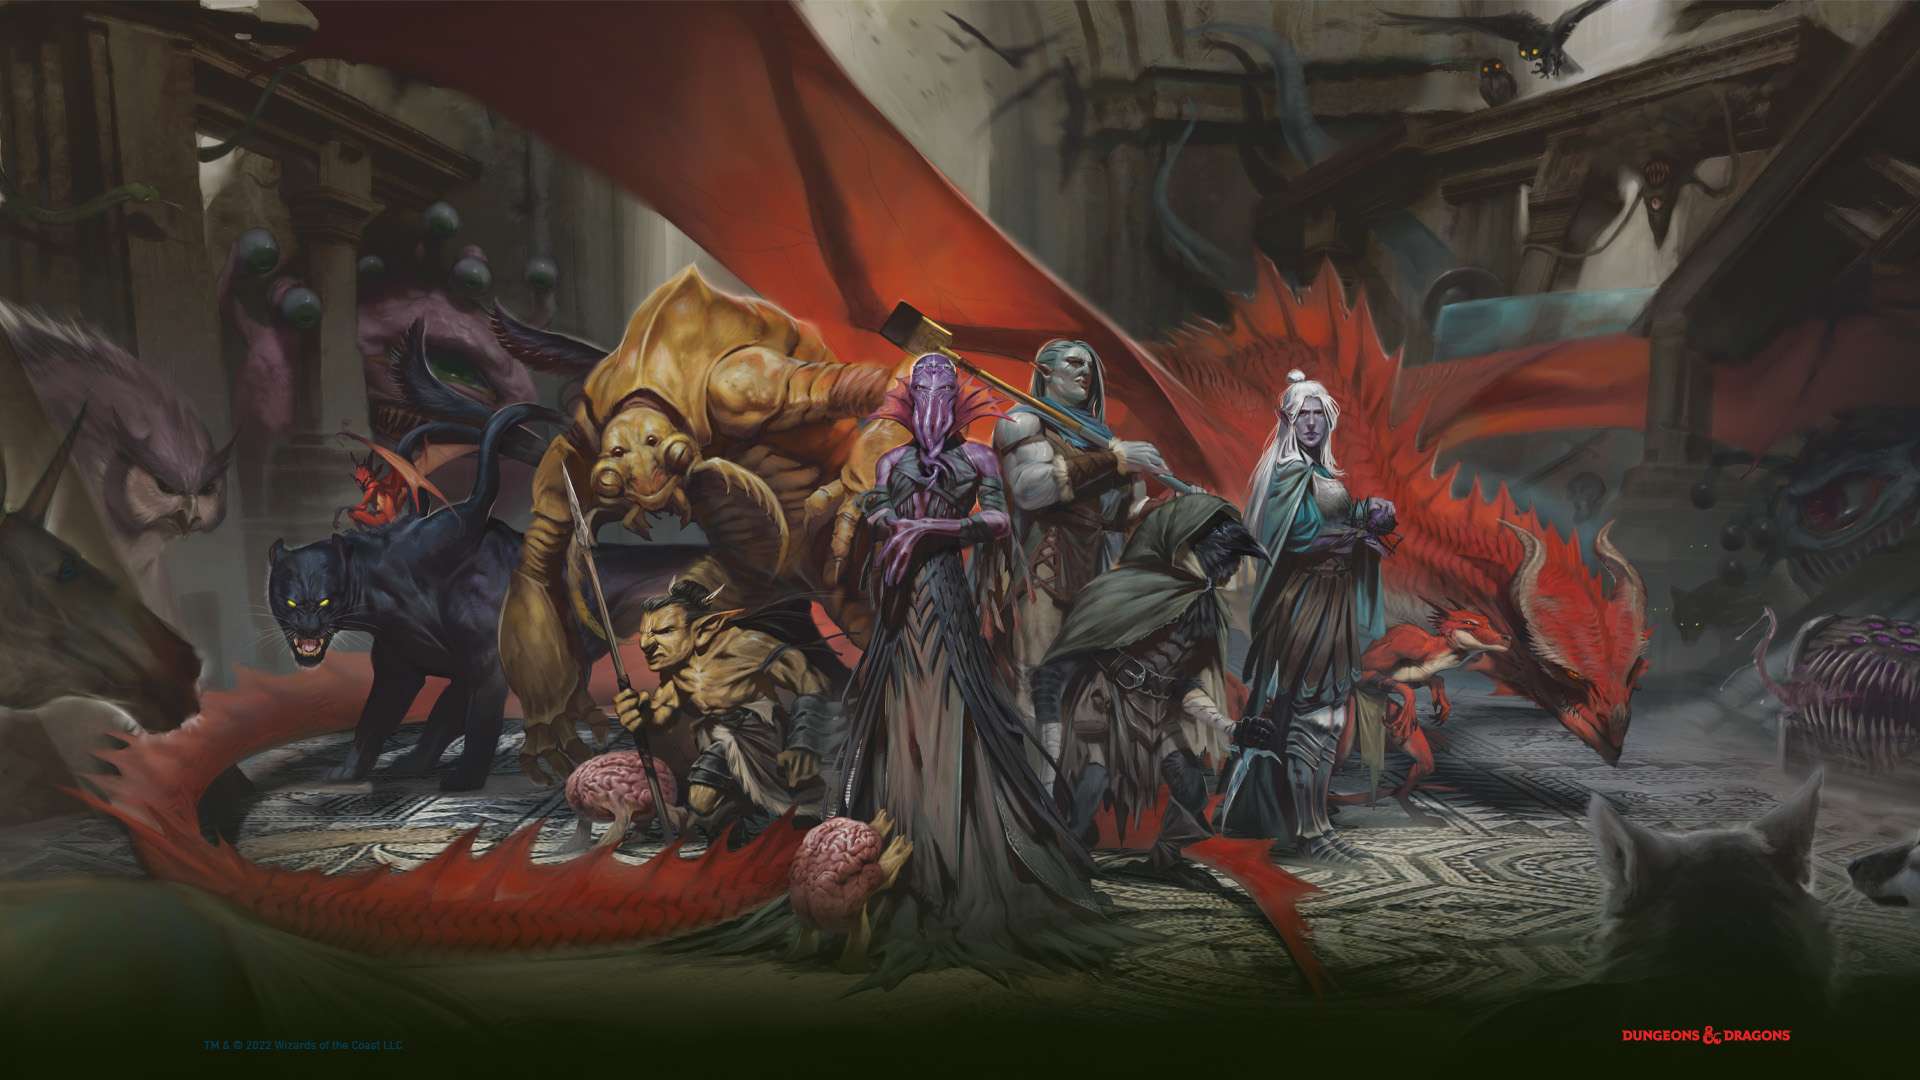 BALDUR'S GATE 3 Is Coming to Your Next DUNGEONS & DRAGONS Campaign